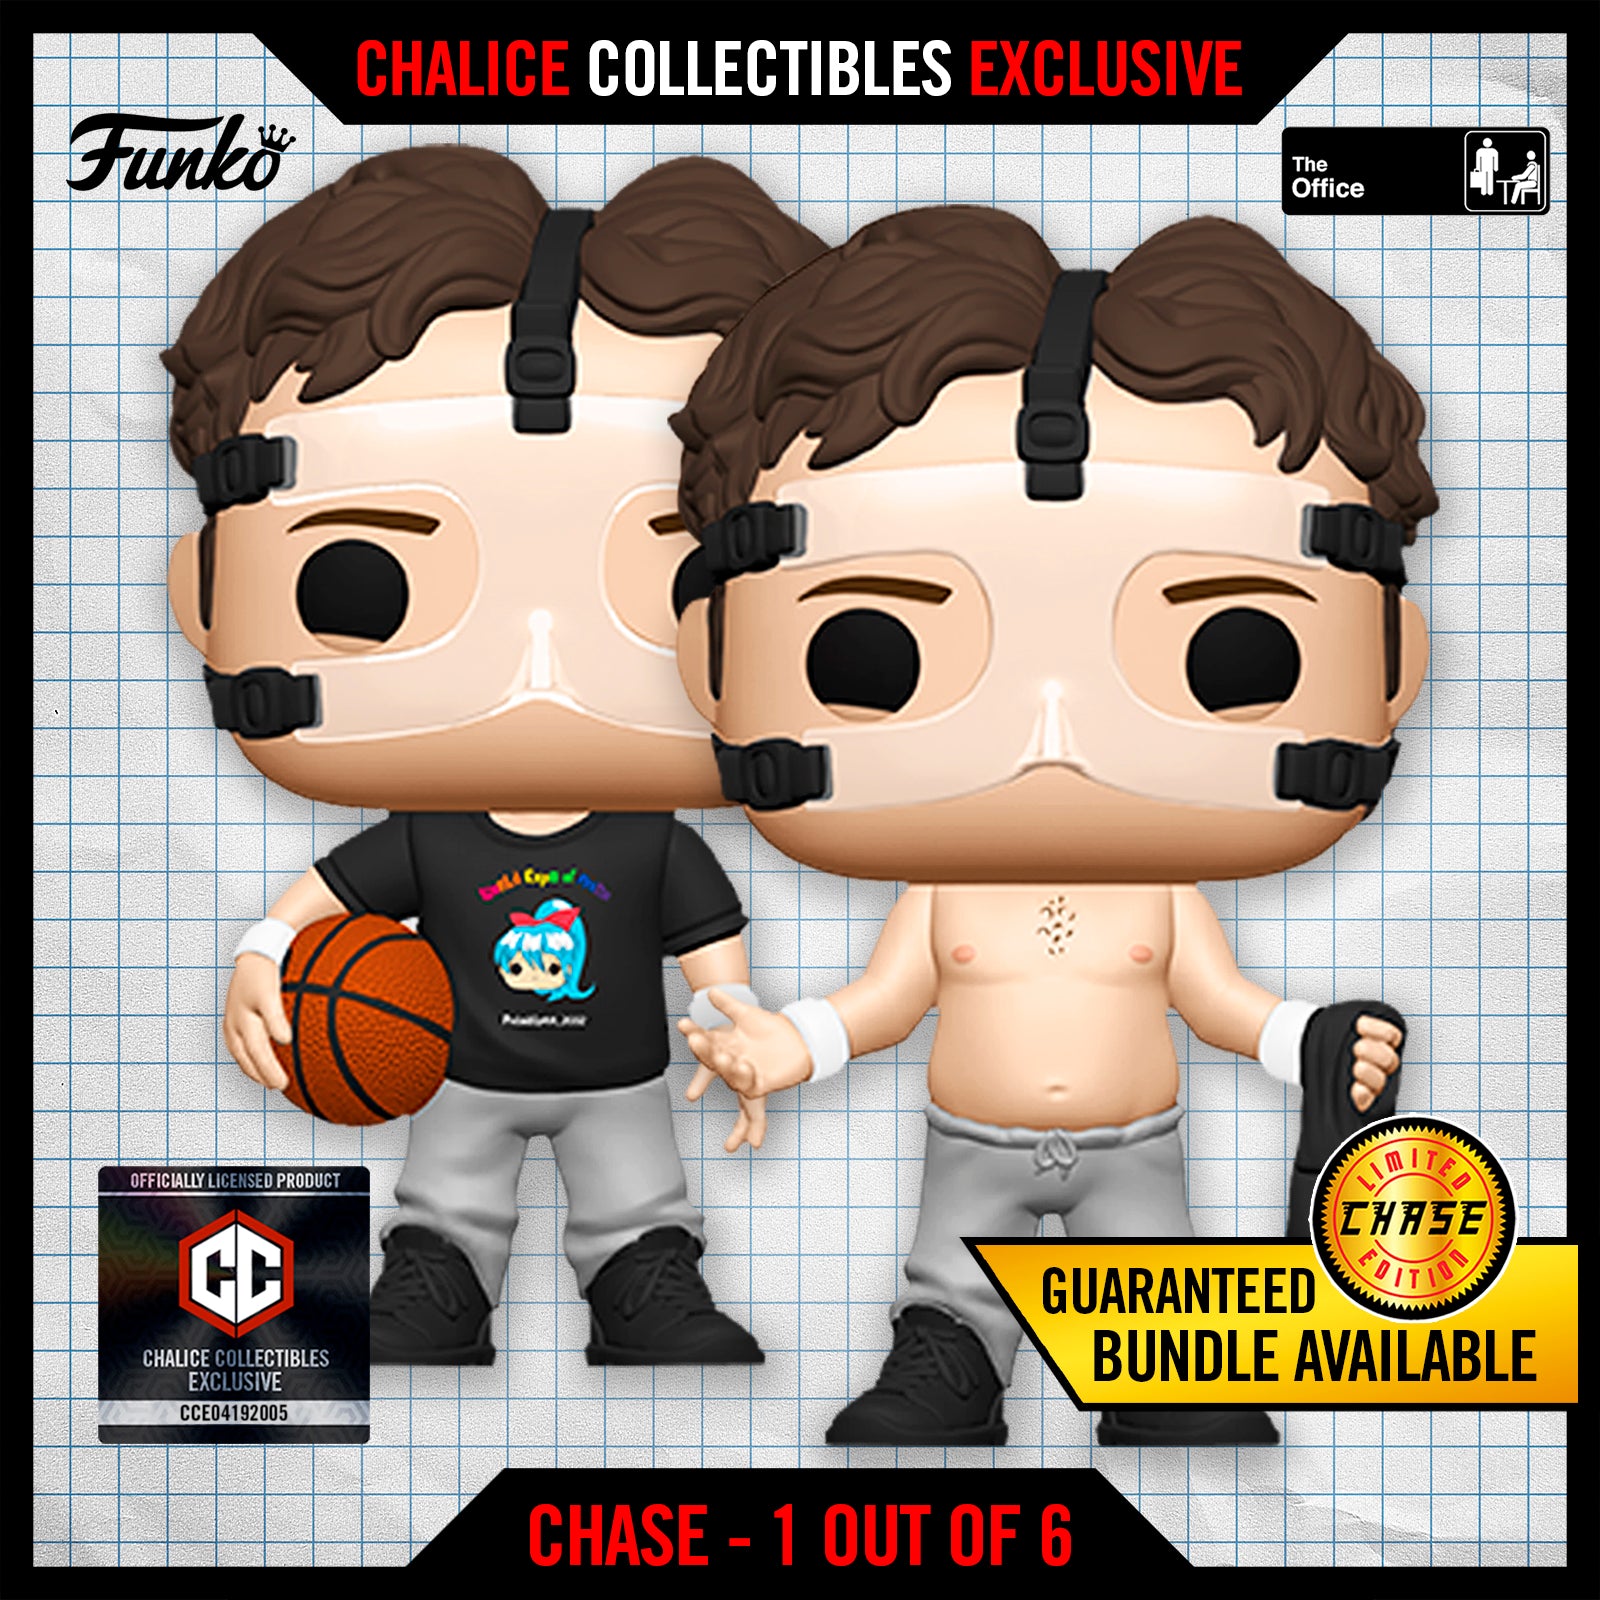 Funko Pop! Chalice Collectibles Exclusive: The Office: Dwight Schrute